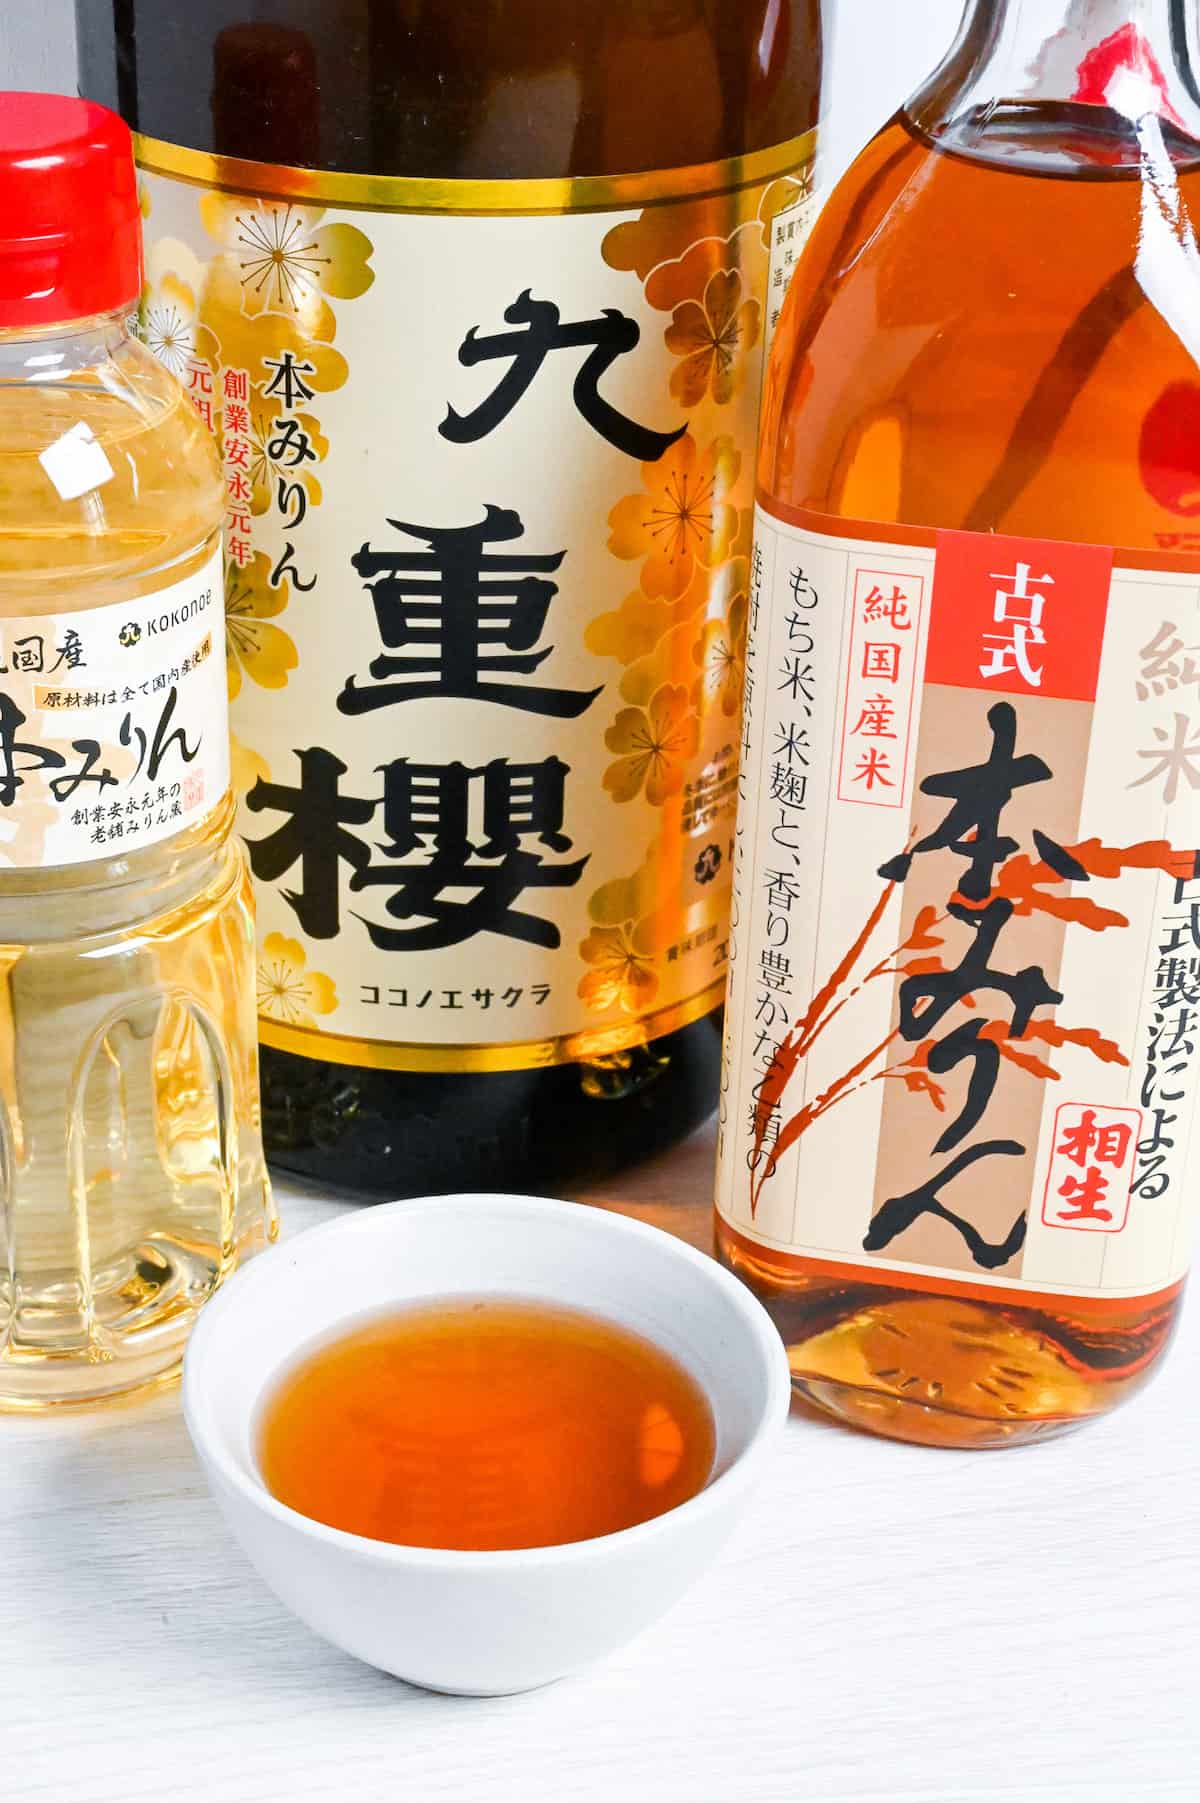 Bottles of Japanese hon mirin (Sweet rice wine seasoning) with some poured in a small white bowl